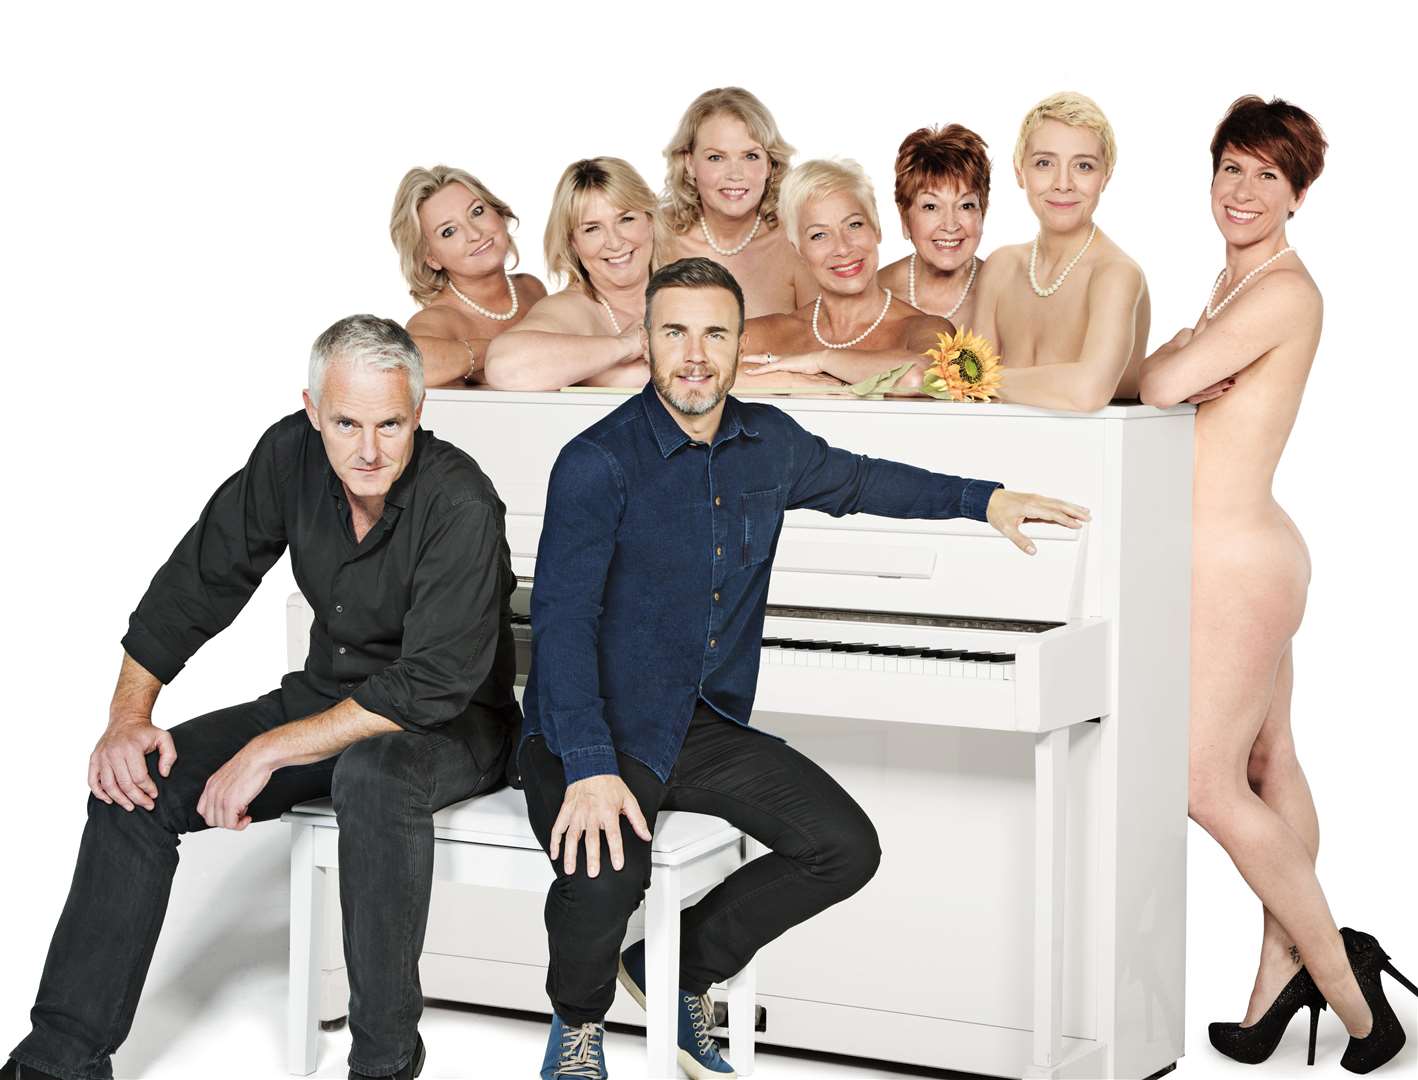 The music for Calendar Girls was written by Gary Barlow and Tim Firth